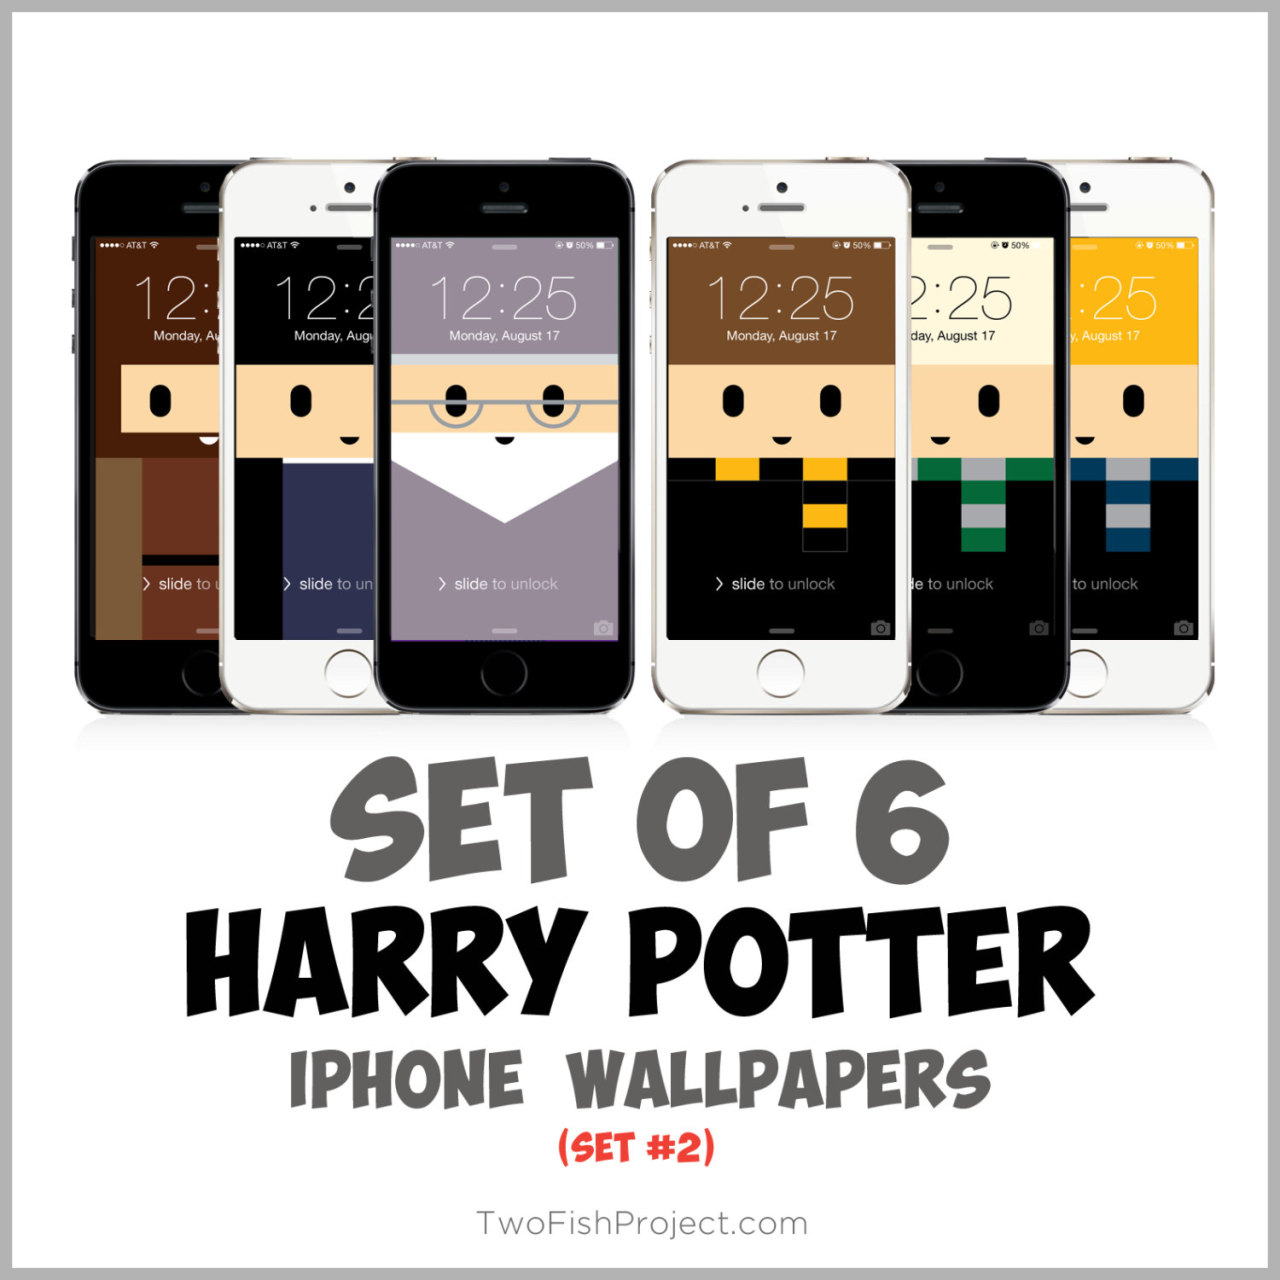 Harry Potter Iphone Wallpapers For Iphone 5, 5c, 5s, - HD Wallpaper 